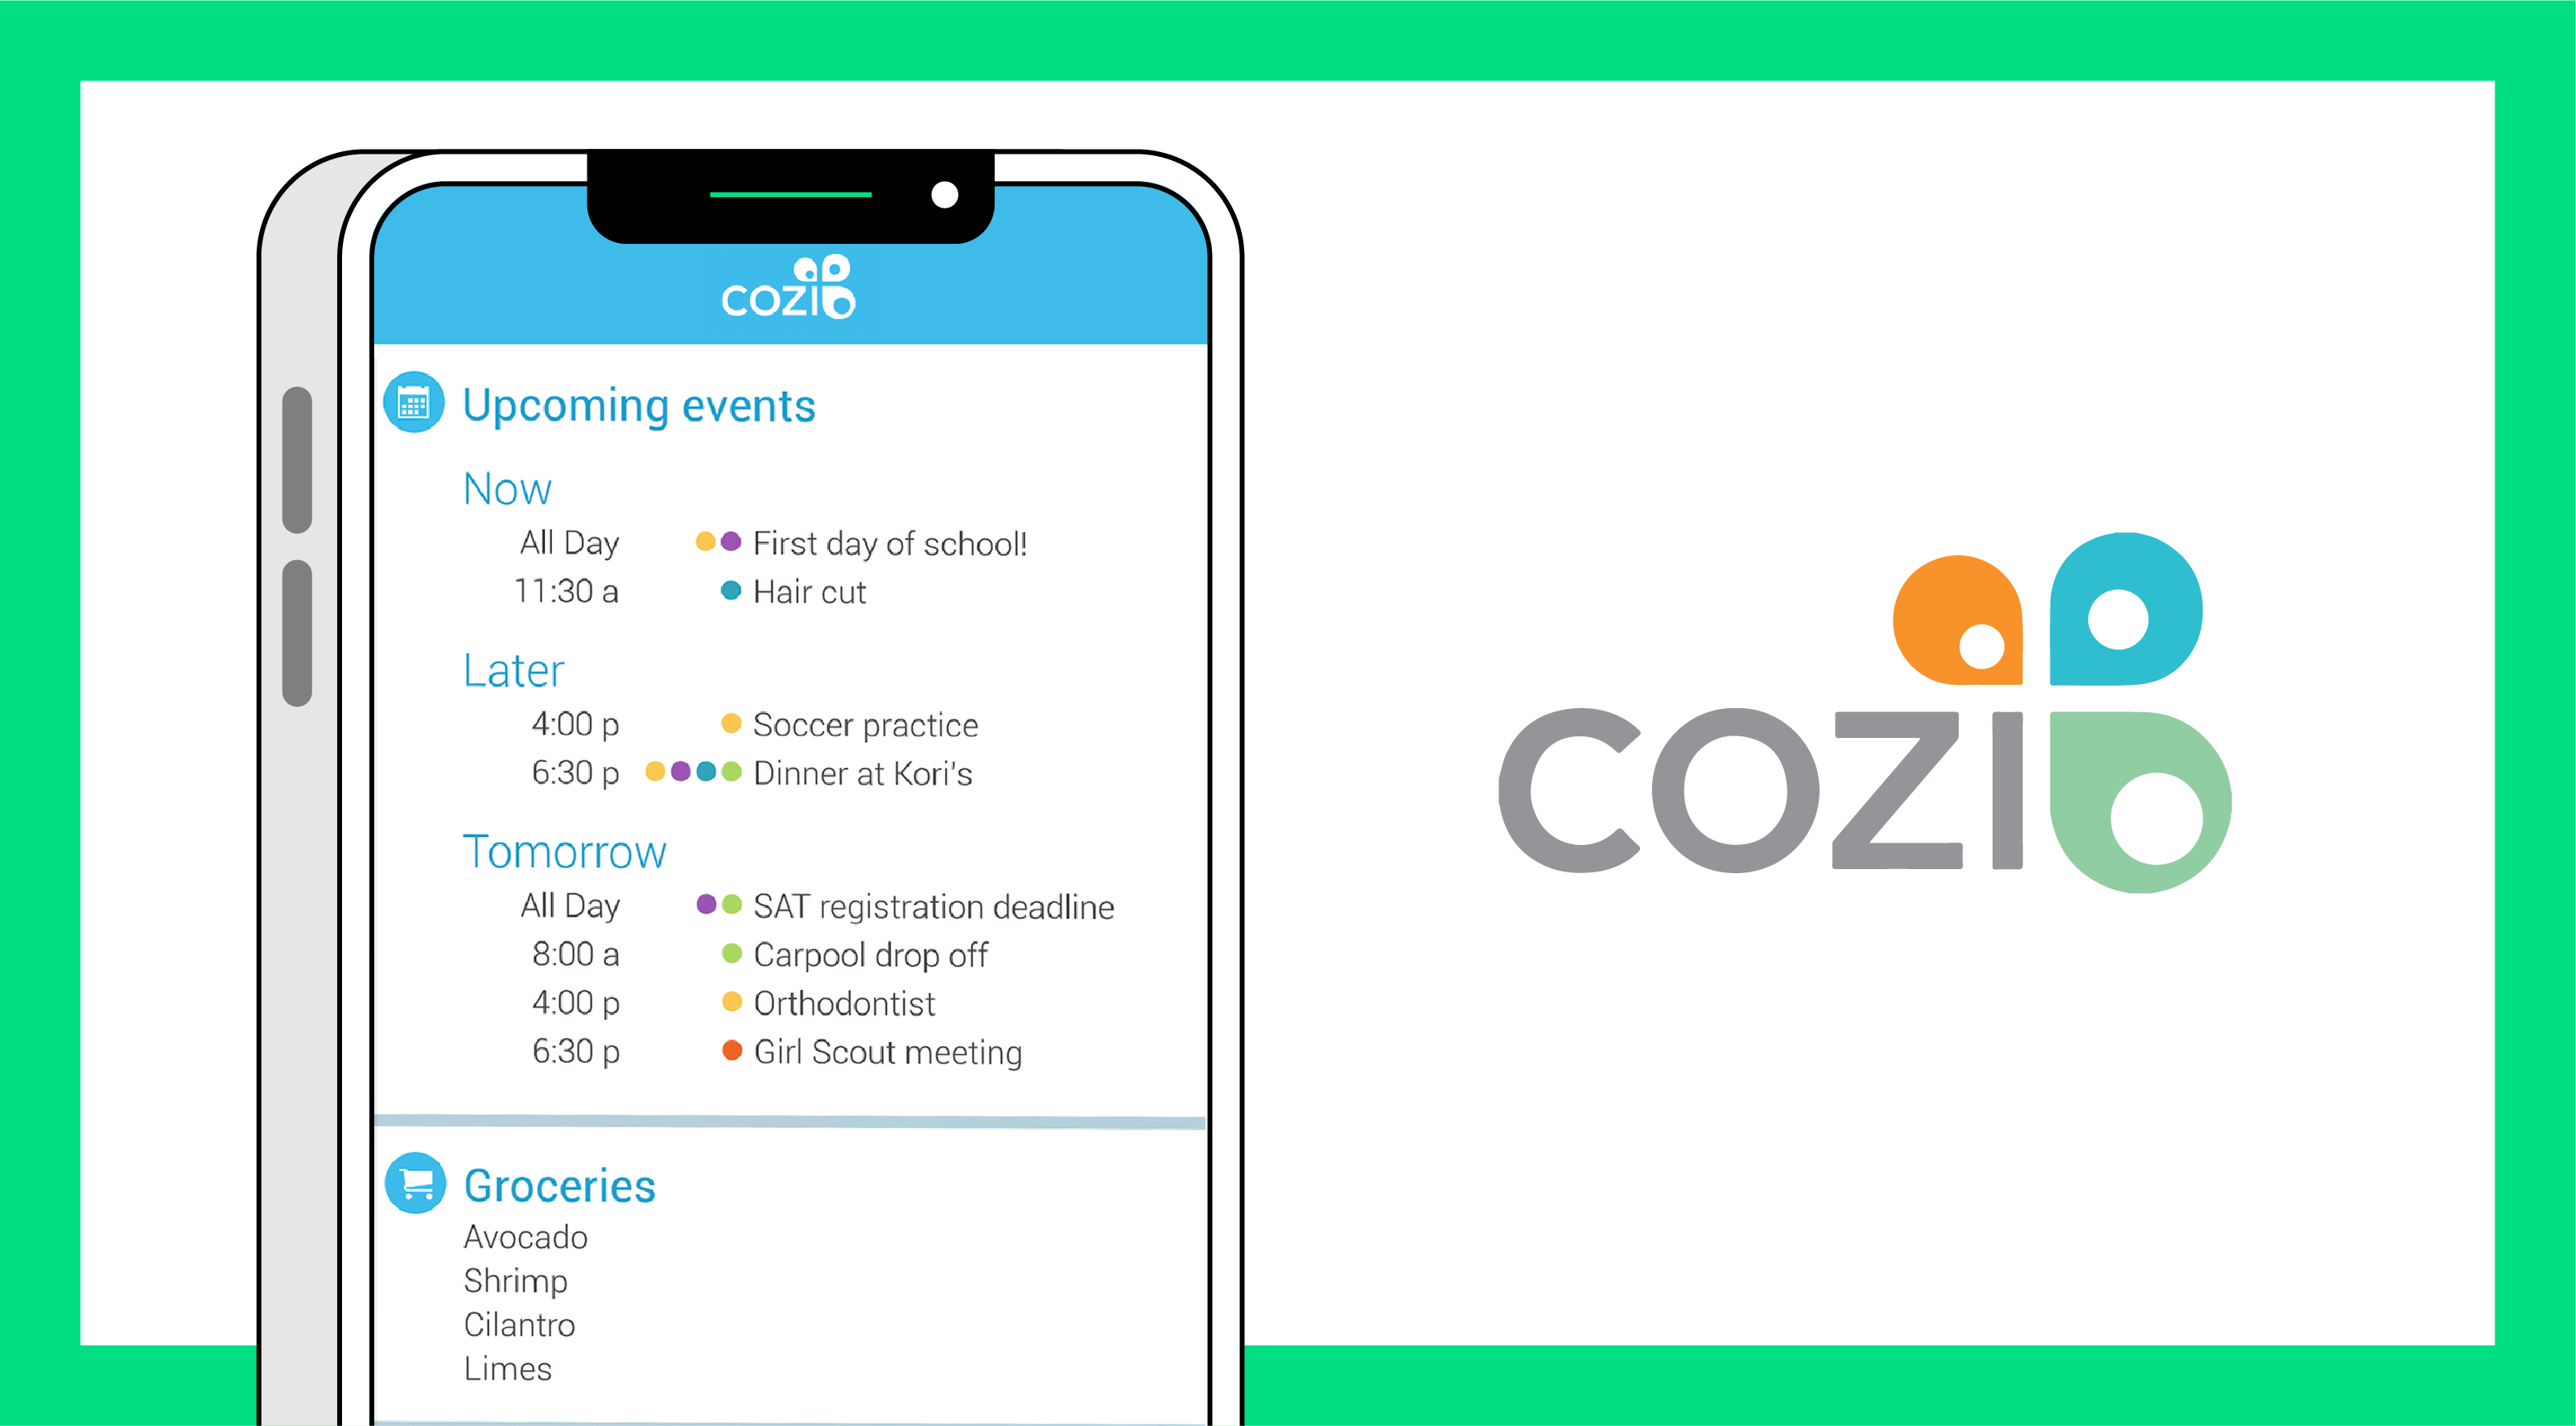 Image of a phone with the cozi app on the screen surrounded by a green border